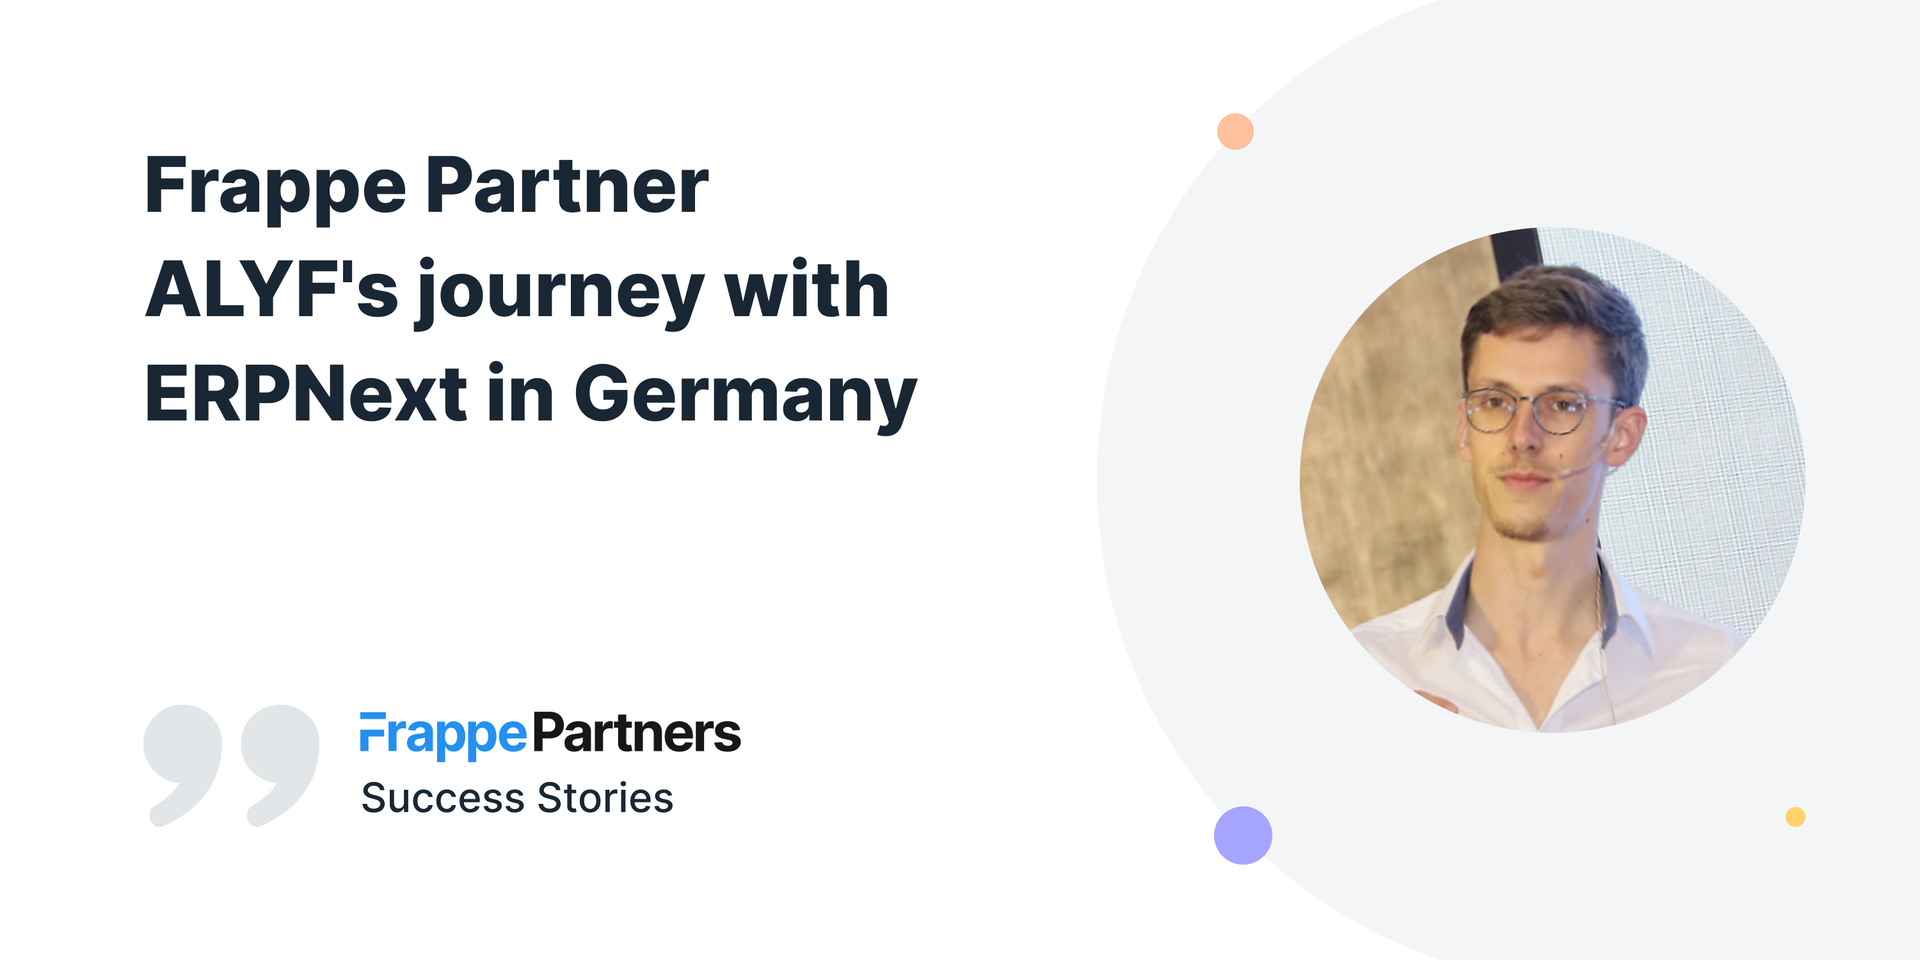 Frappe Partner ALYF's journey with ERPNext in Germany - Cover Image